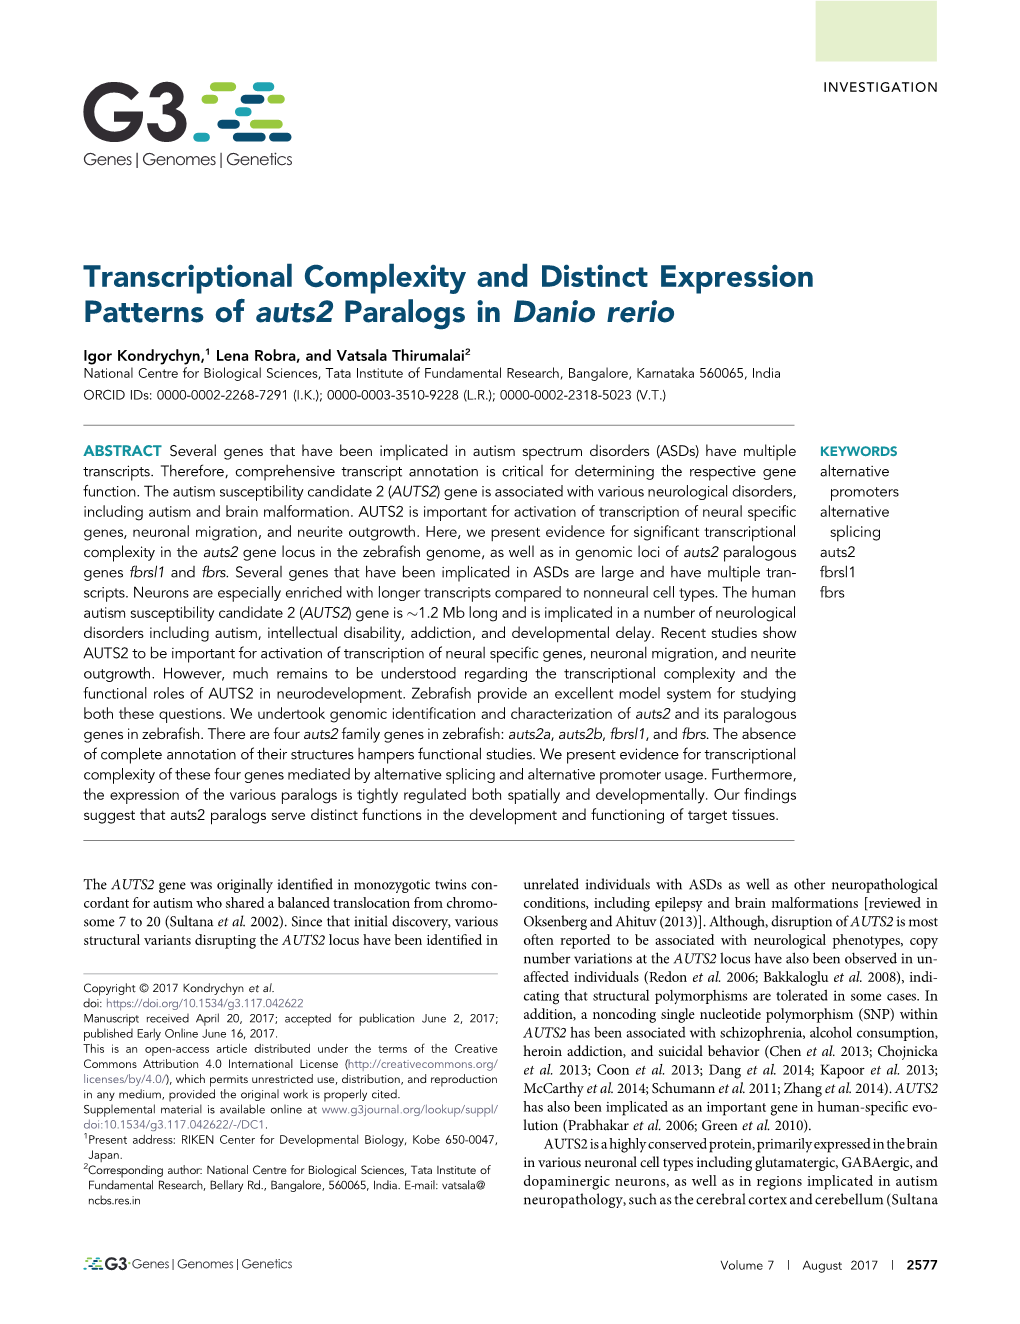 Transcriptional Complexity and Distinct Expression Patterns of Auts2 Paralogs in Danio Rerio